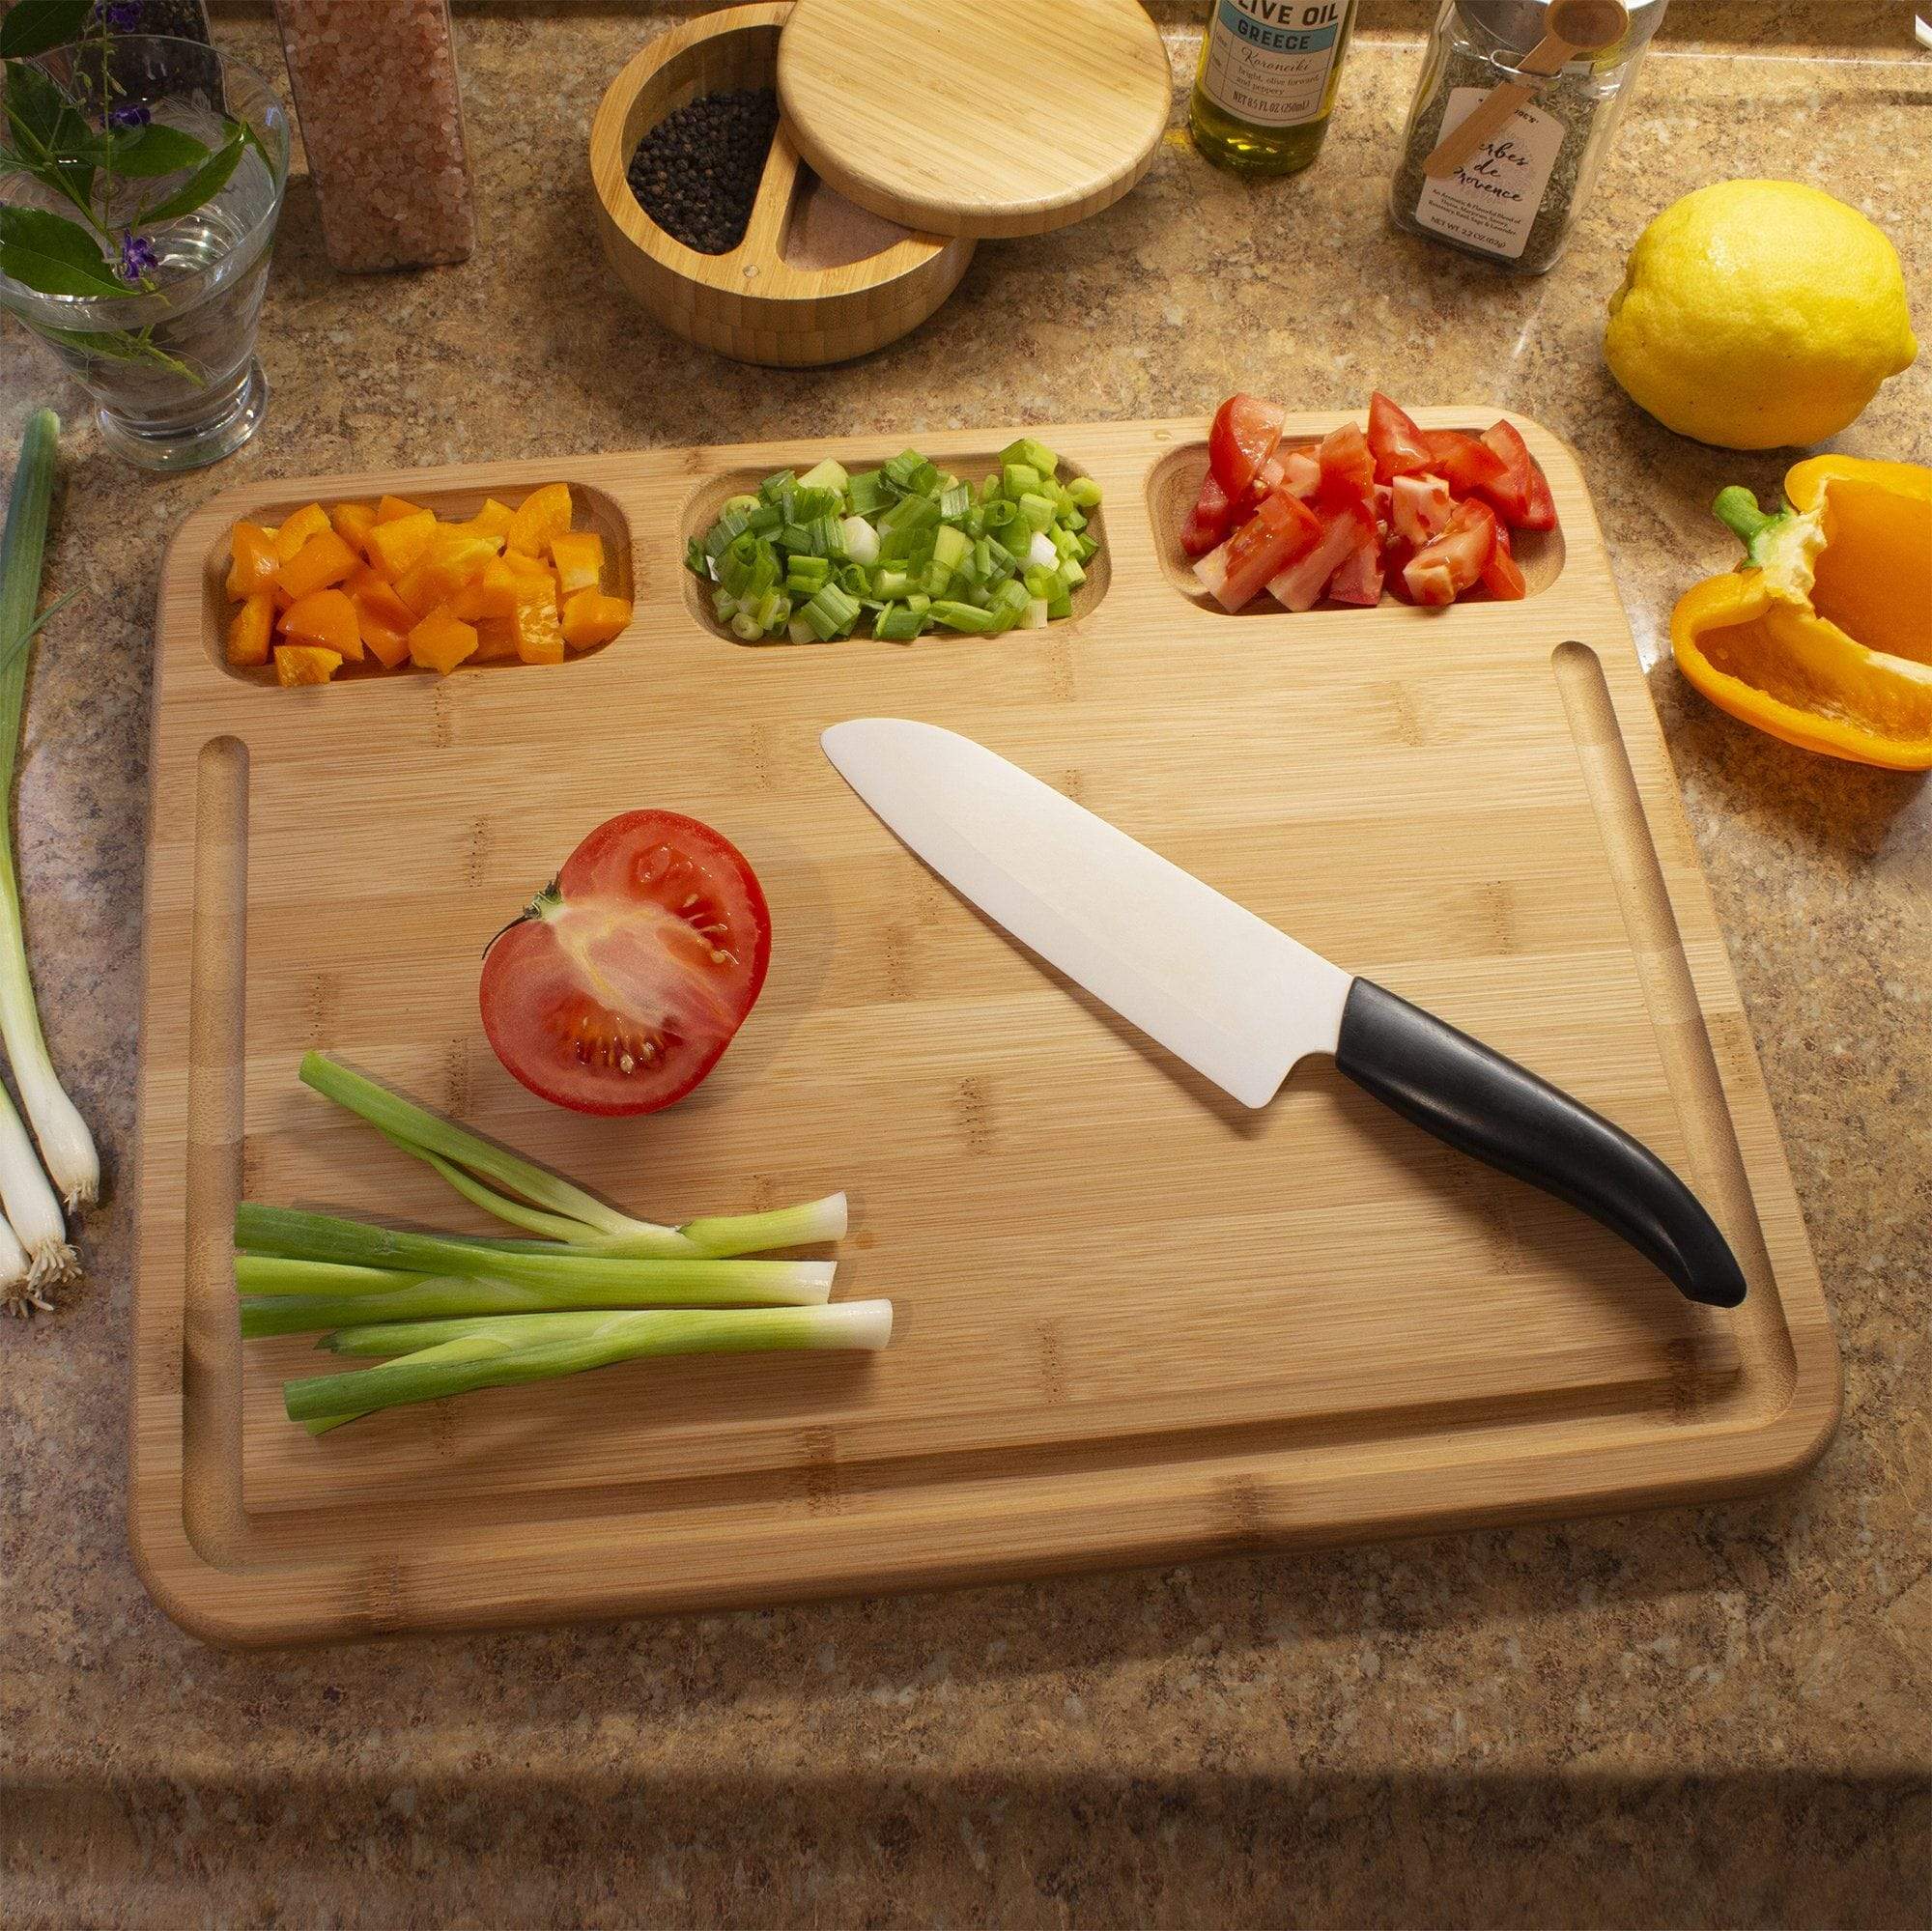 Cutting Boards – Totally Bamboo